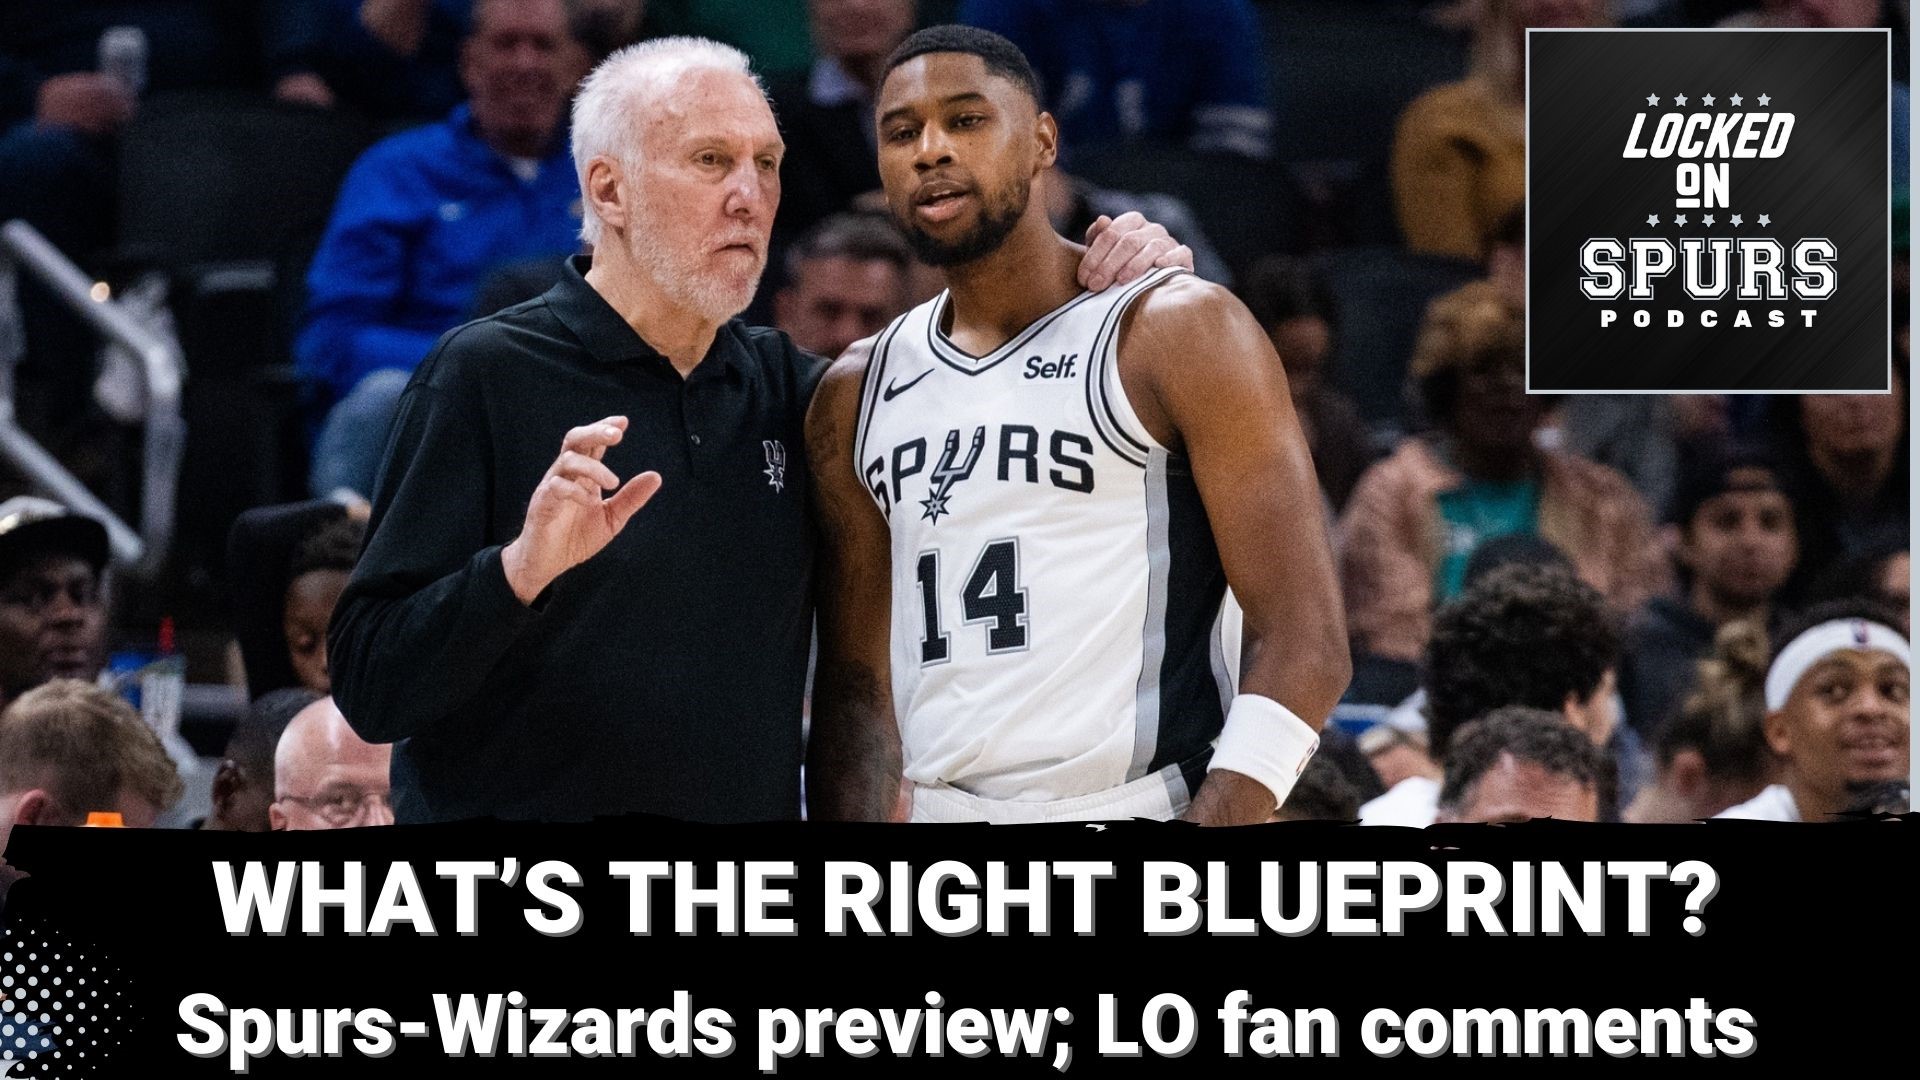 Also, a quick Spurs-Wizards preview and answering Locked On Spurs fan comments.